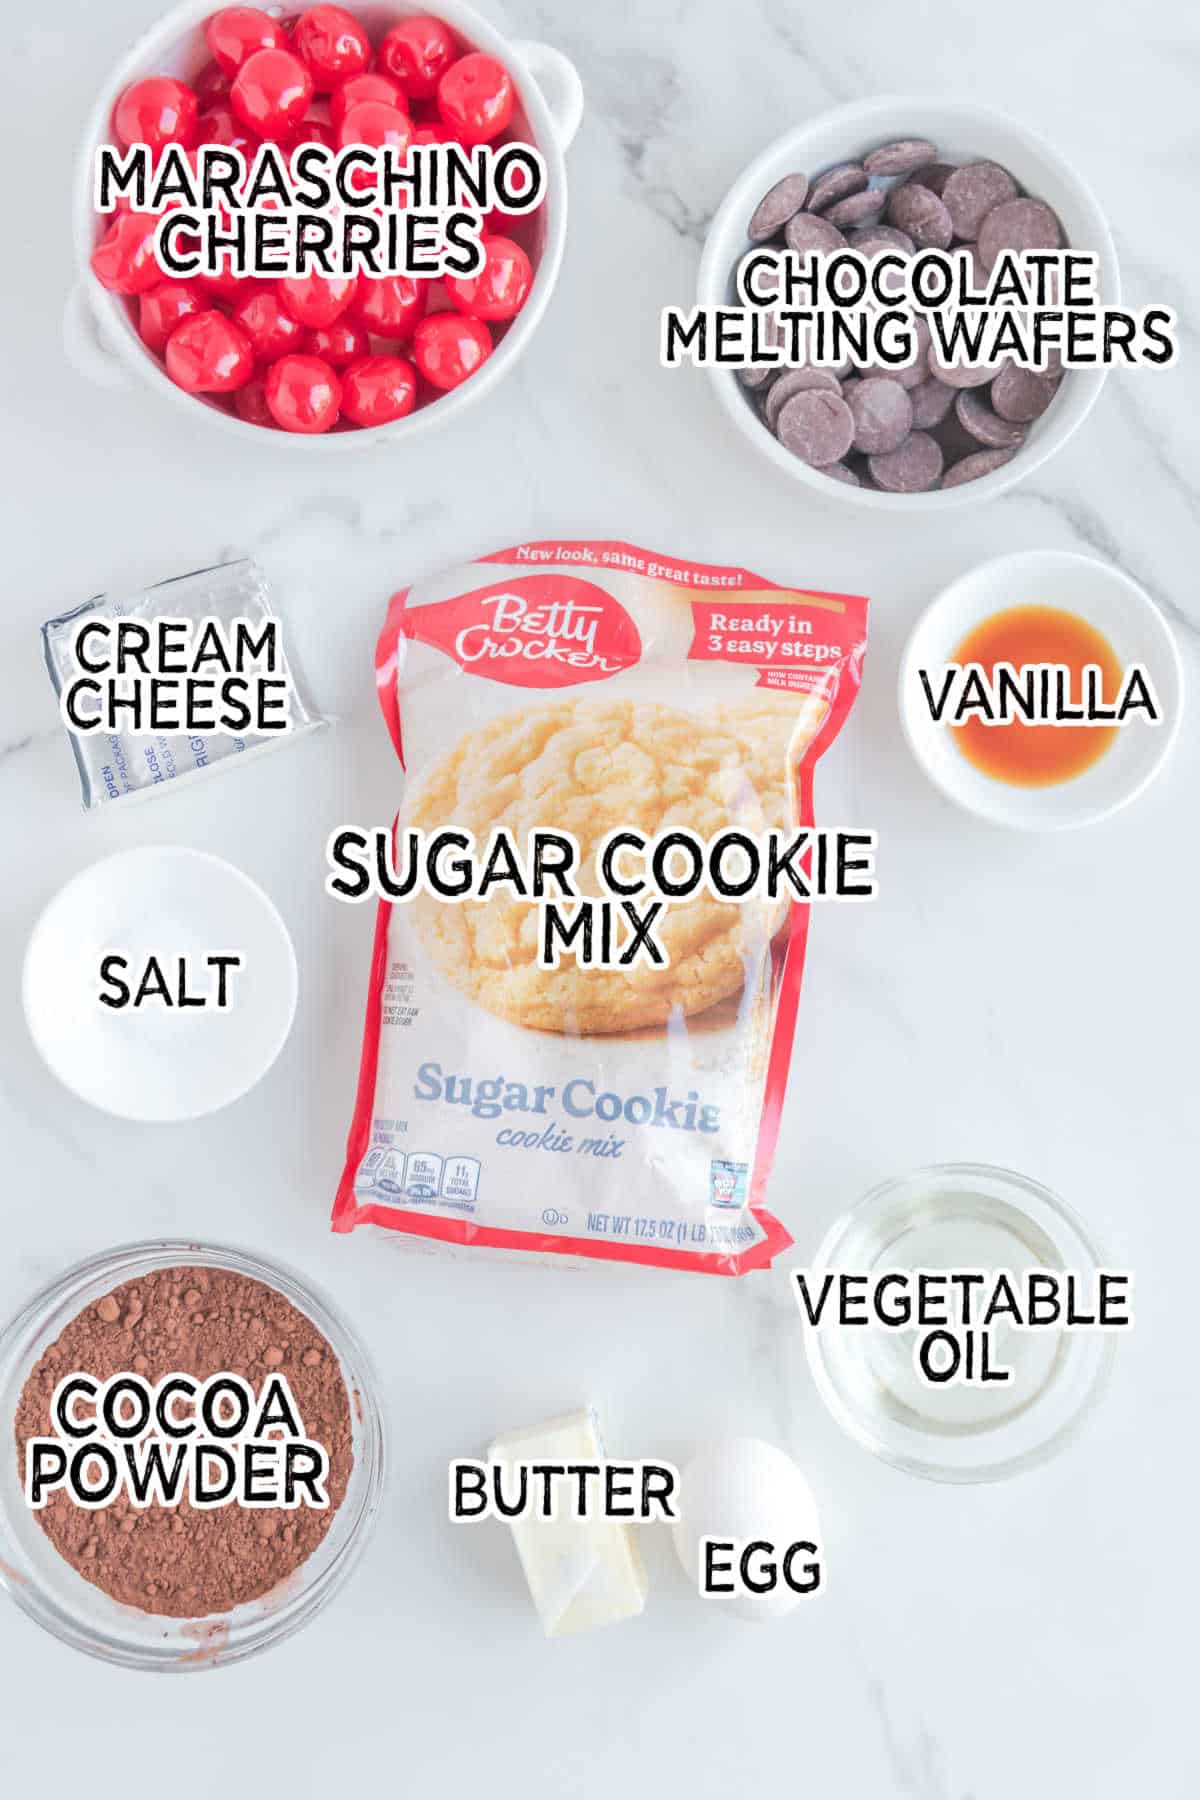 Ingredients to make chocolate cherry cookies.